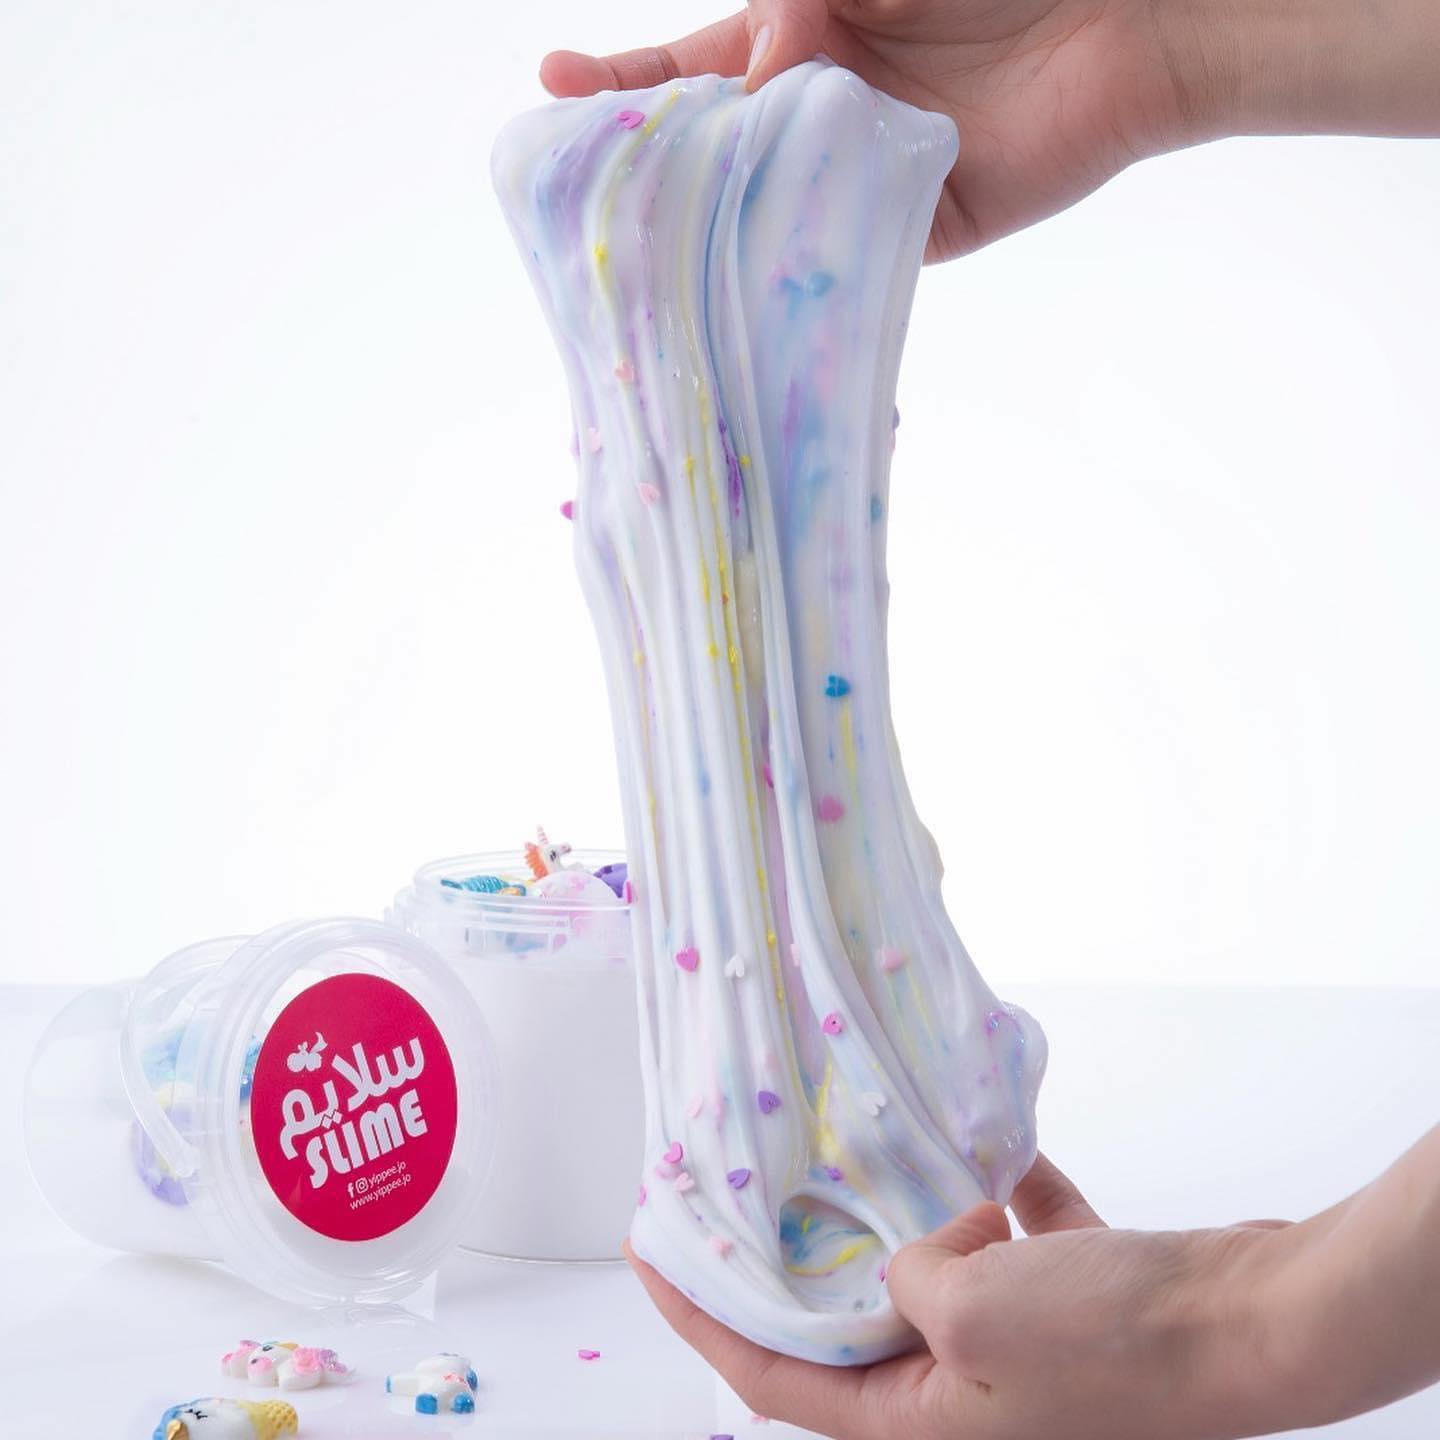 Yippee Unicorn Cereal Slime